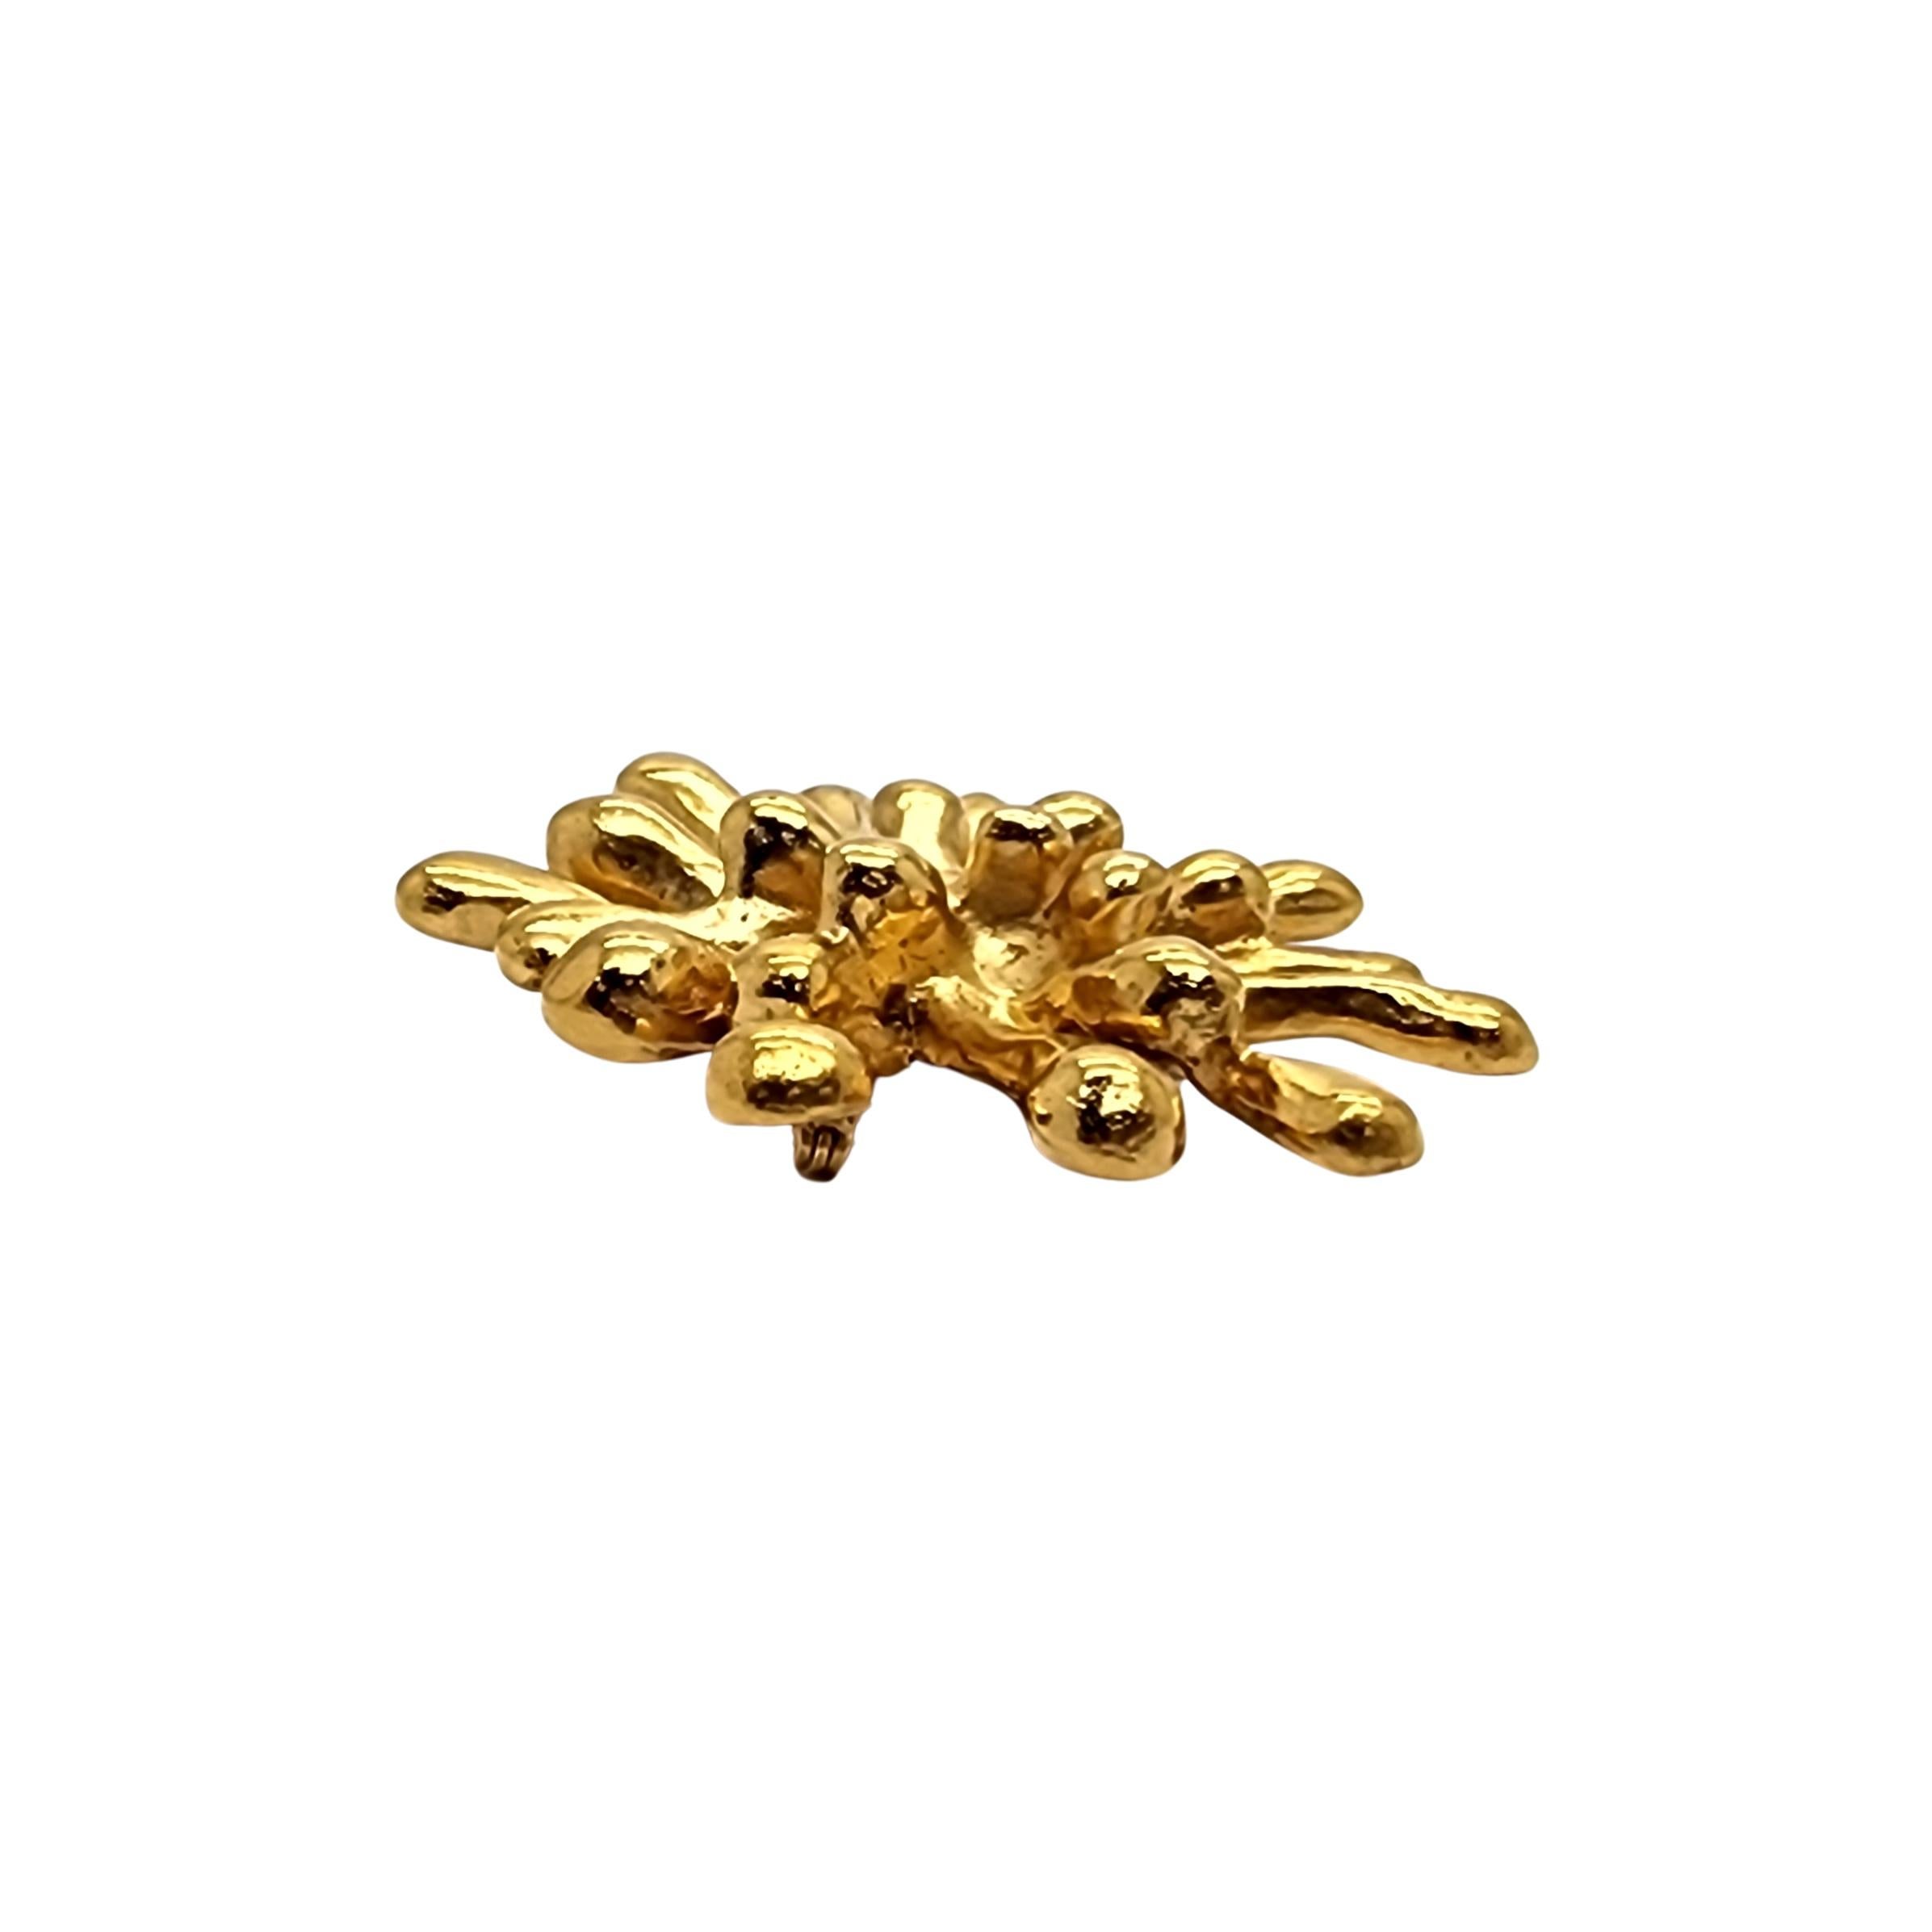 Christian LaCroix France Gold Tone Splash Spatter Pin Brooch #14848 In Good Condition For Sale In Washington Depot, CT